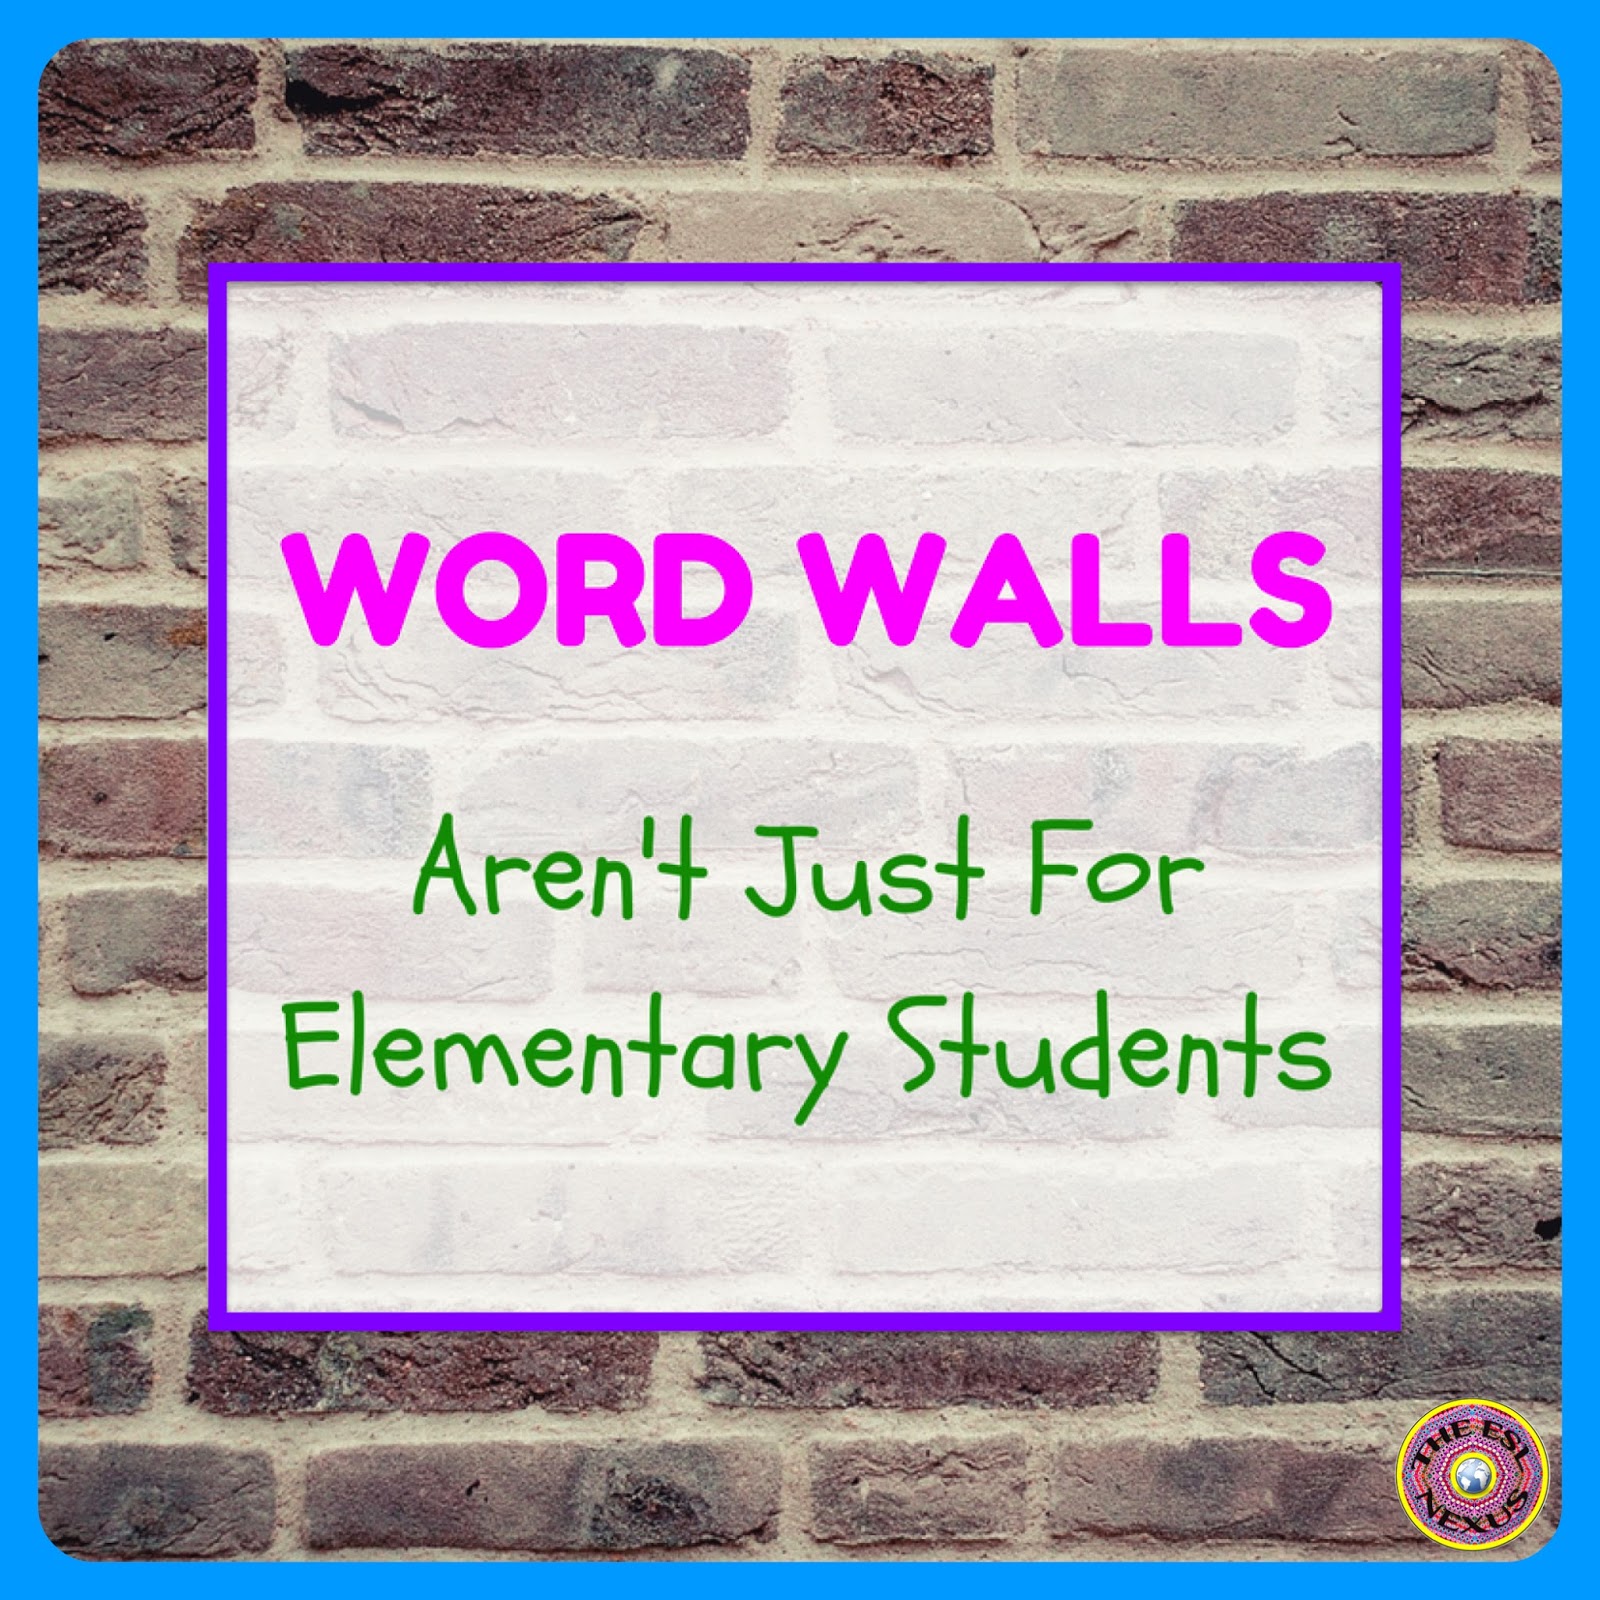 Descriptions of 3 types of word walls used in an ESL classroom | The ESL Connection